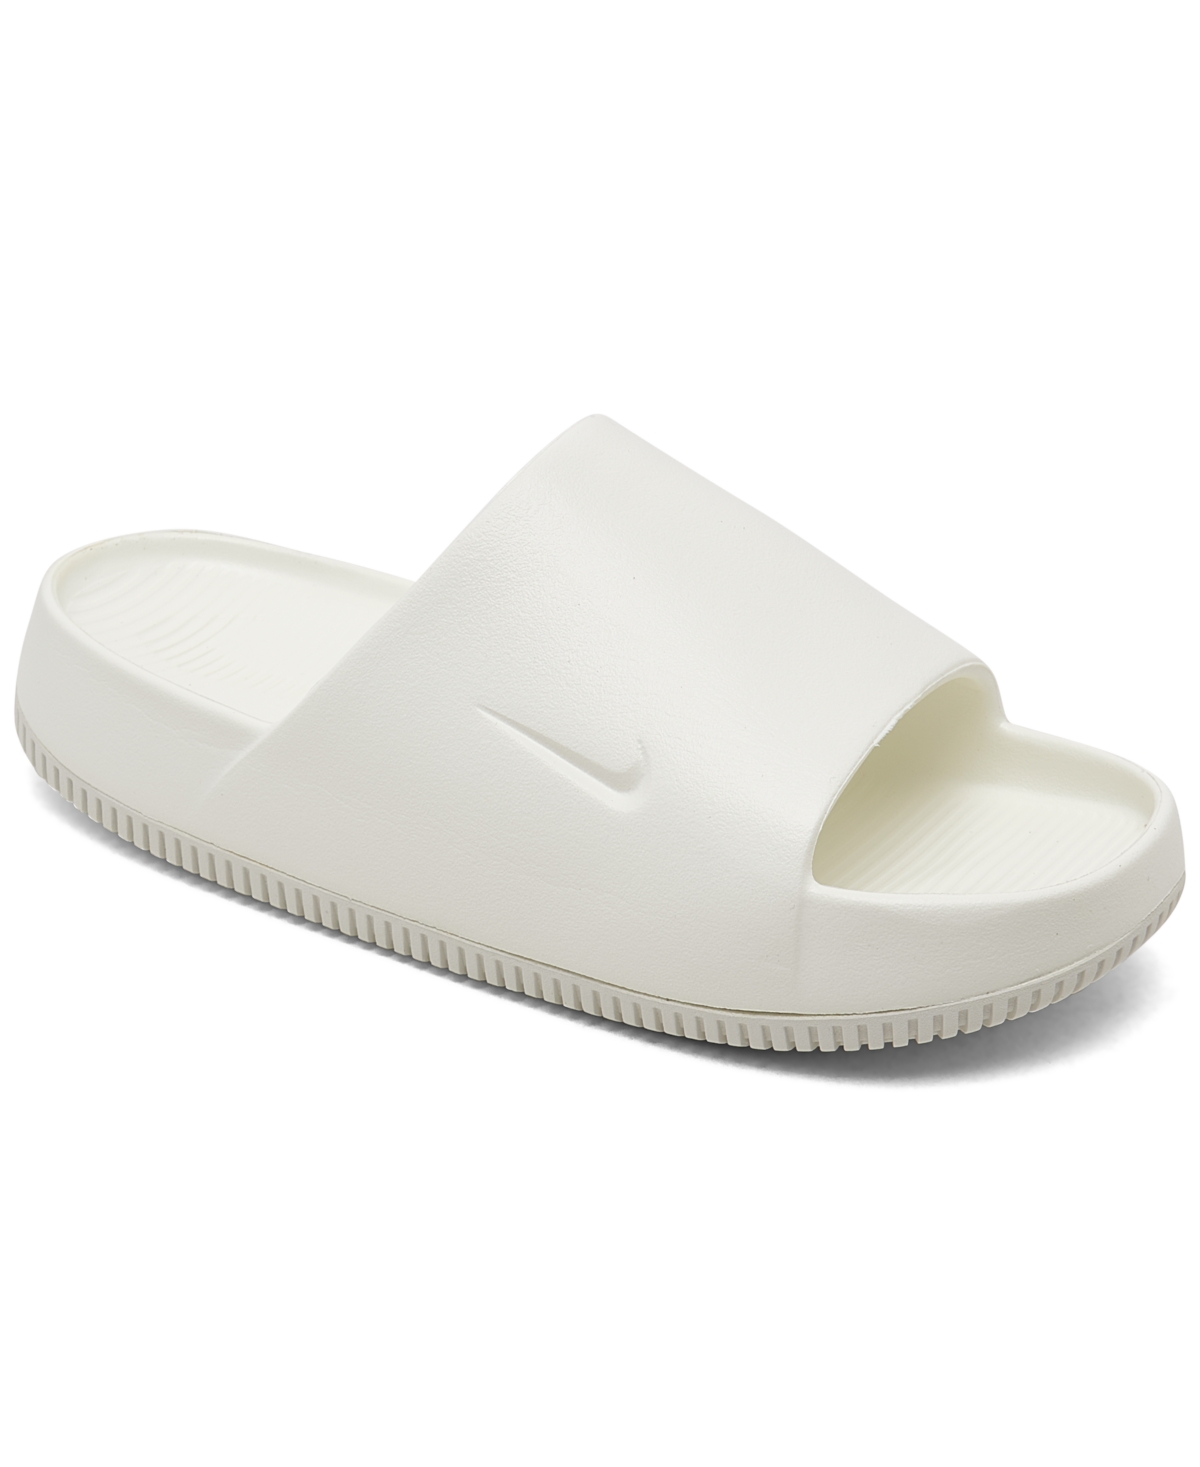 Shop Nike Women's Calm Slide Sandals From Finish Line In Sail